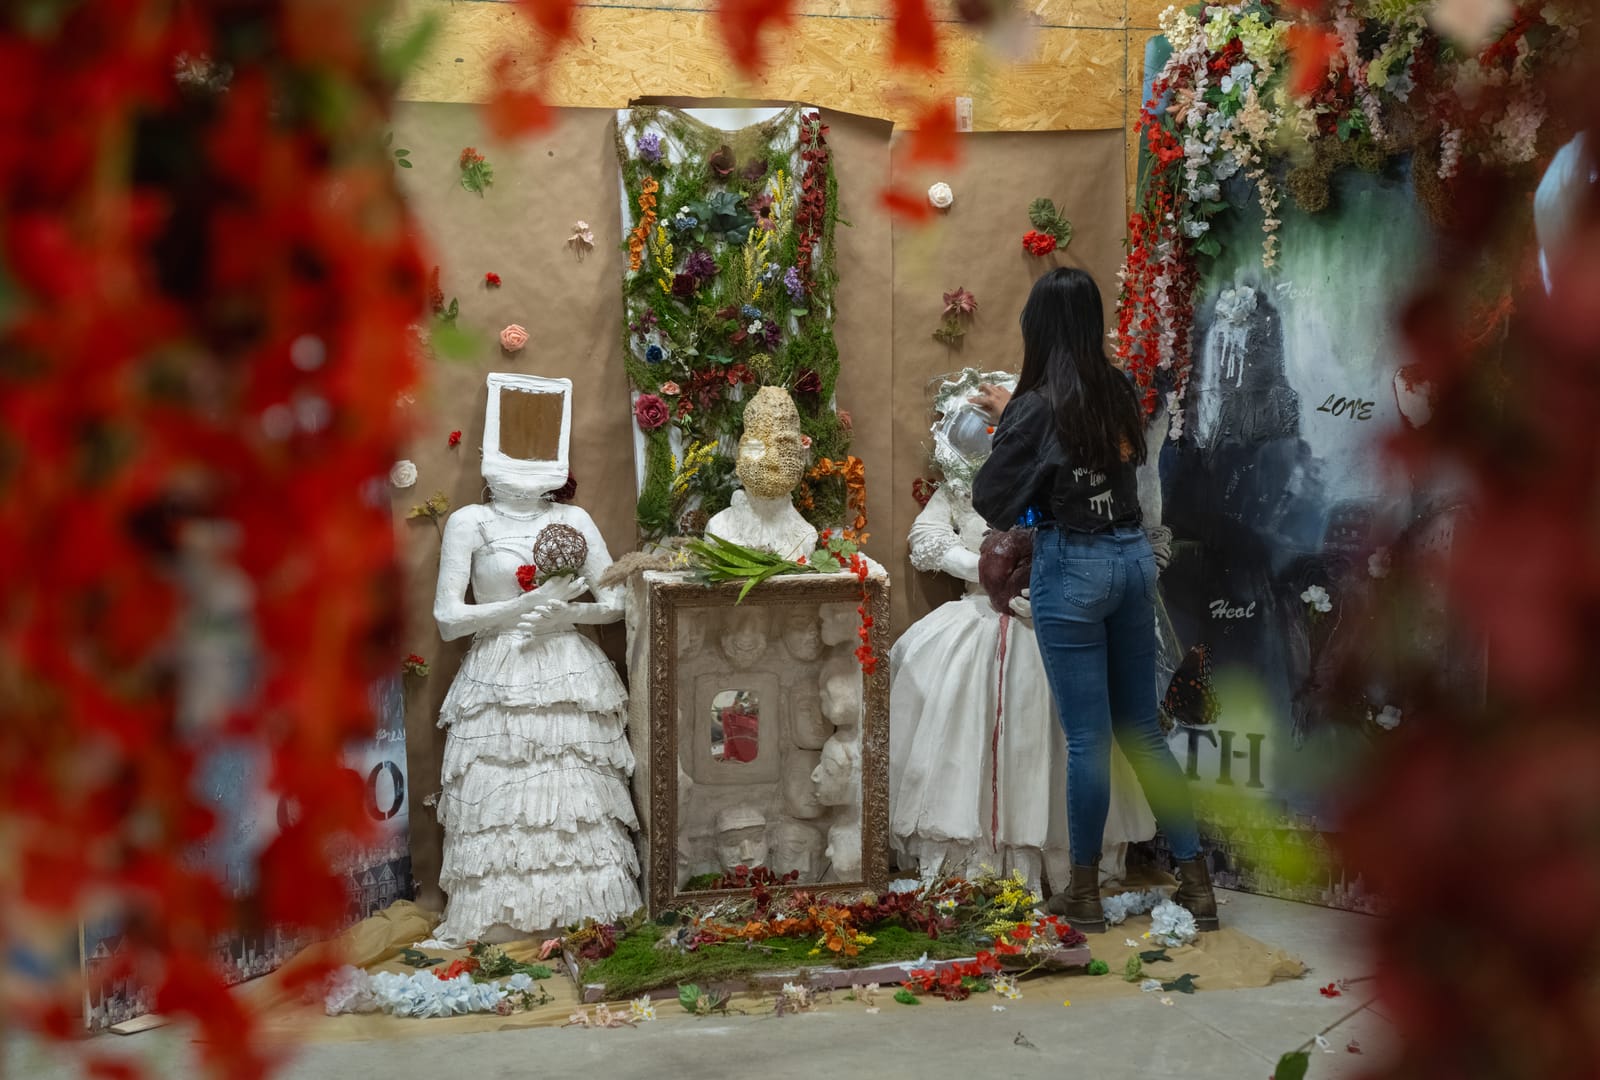 A person with long black hair has their back turned to the camera and is touching a white sculpture of a human form about a foot shorter than them. There are flowers, leaves, and another similar white sculpture strewn around the display.